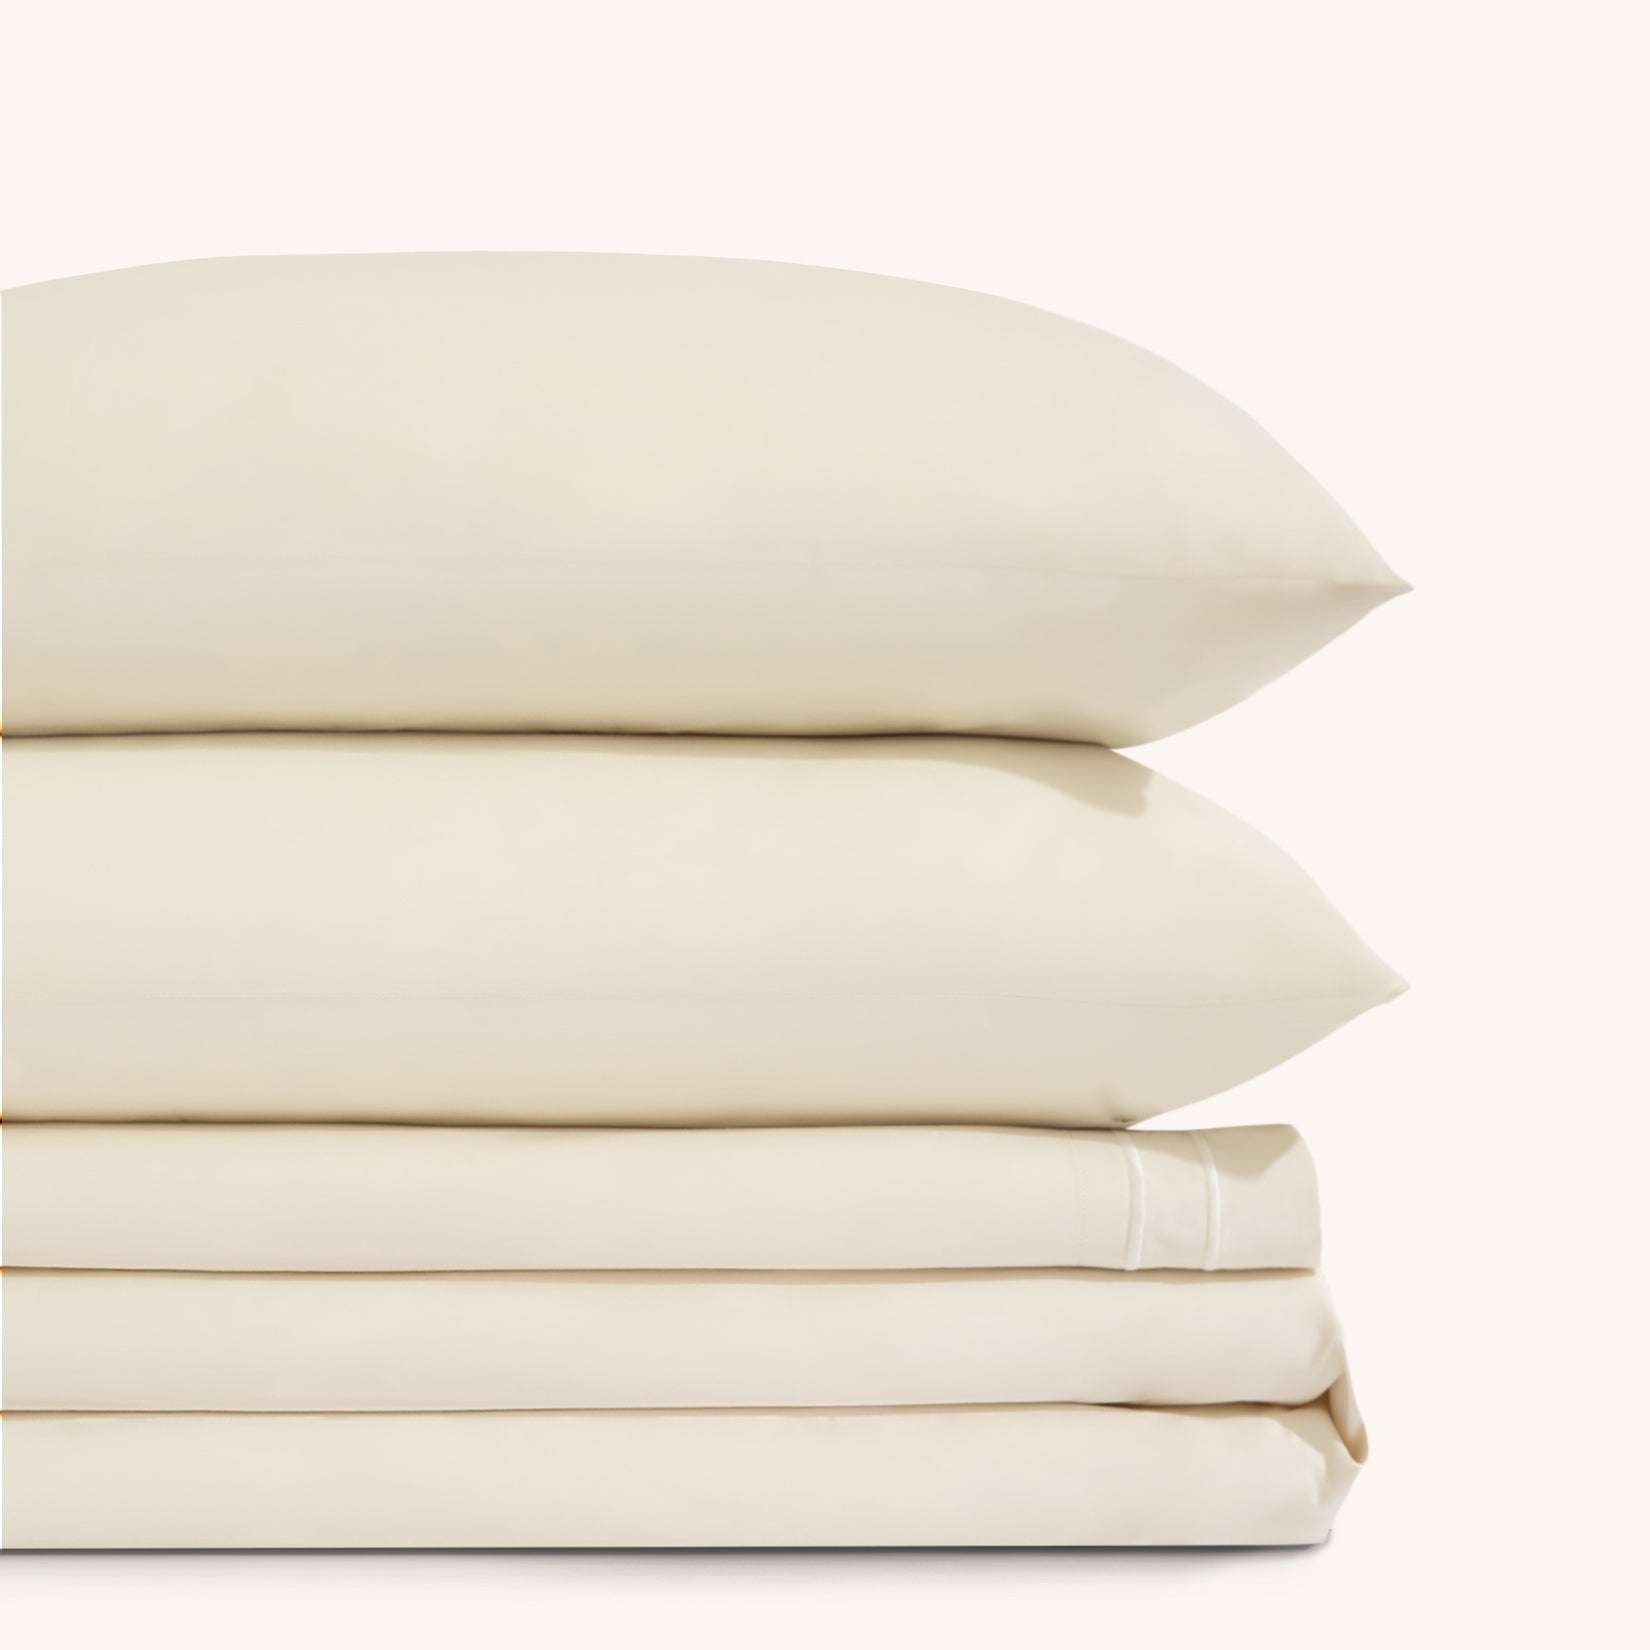 Sofia Ivory White Double Satin Stitched Cuff 300 thread count cotton bed sheet set. Two white pillows stacked on folded white sheet set.